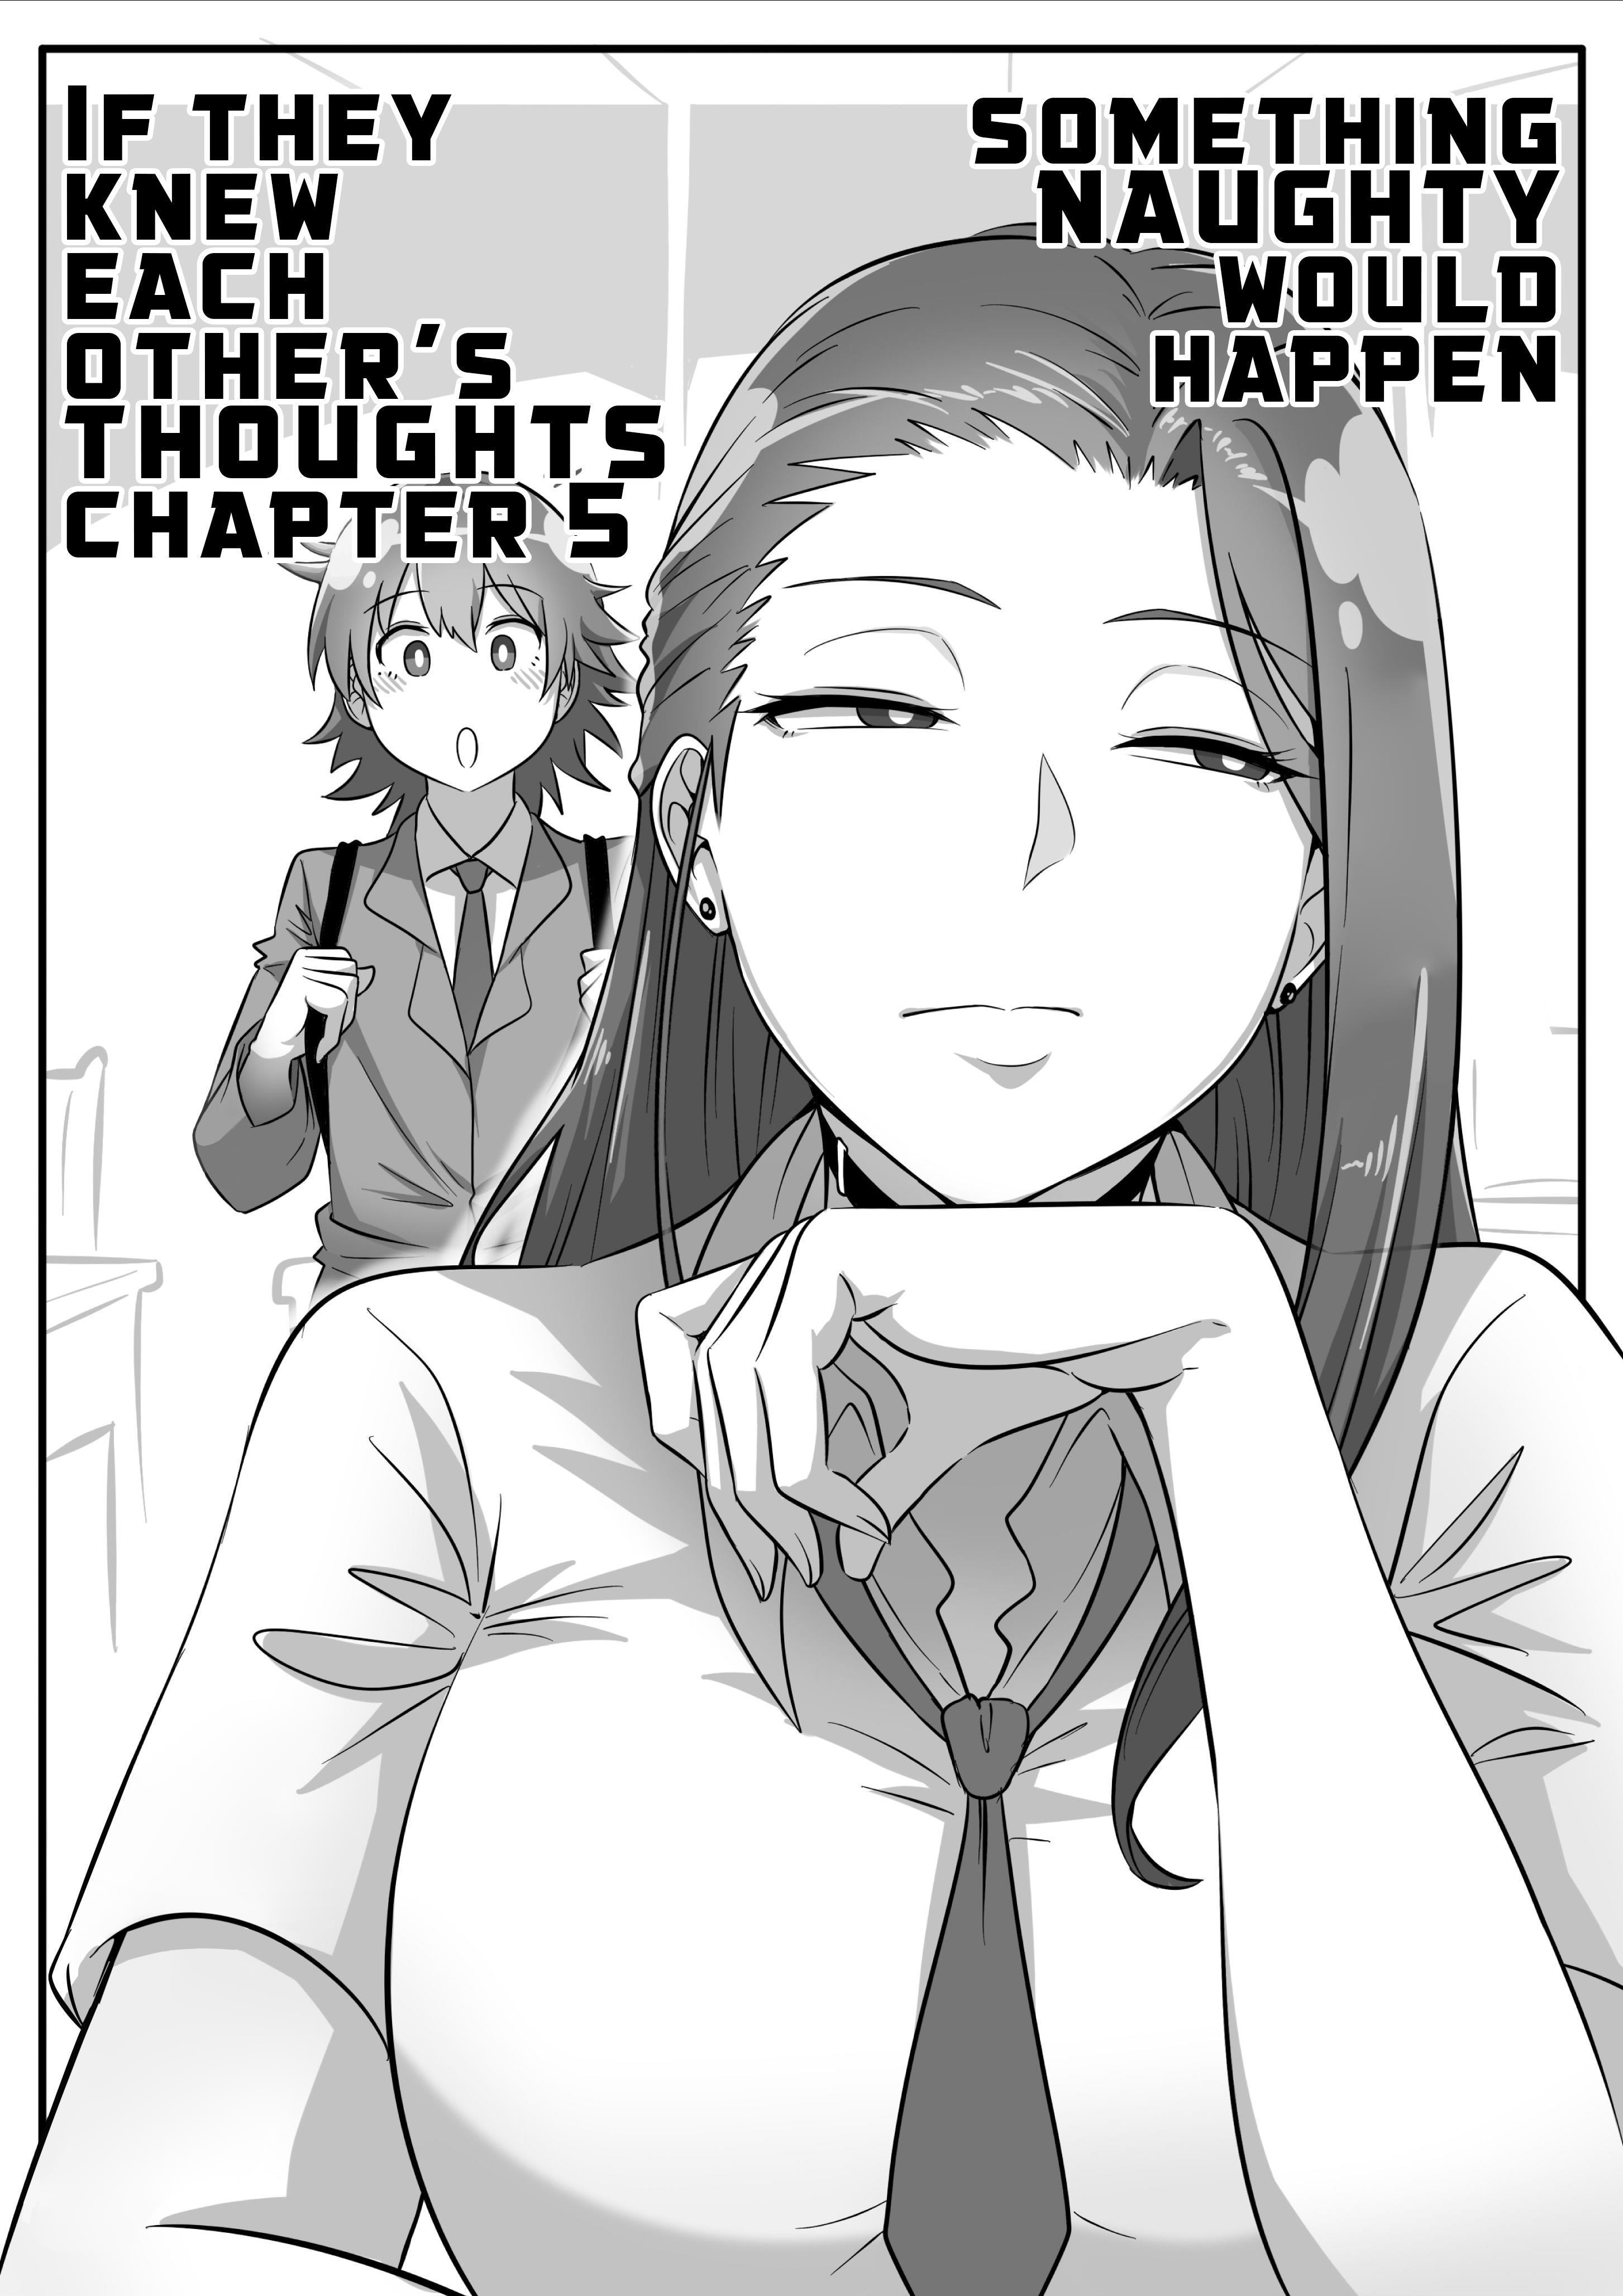 Something Naughty Would Happen If They Knew Each Other's Thoughts Chapter 5 #1